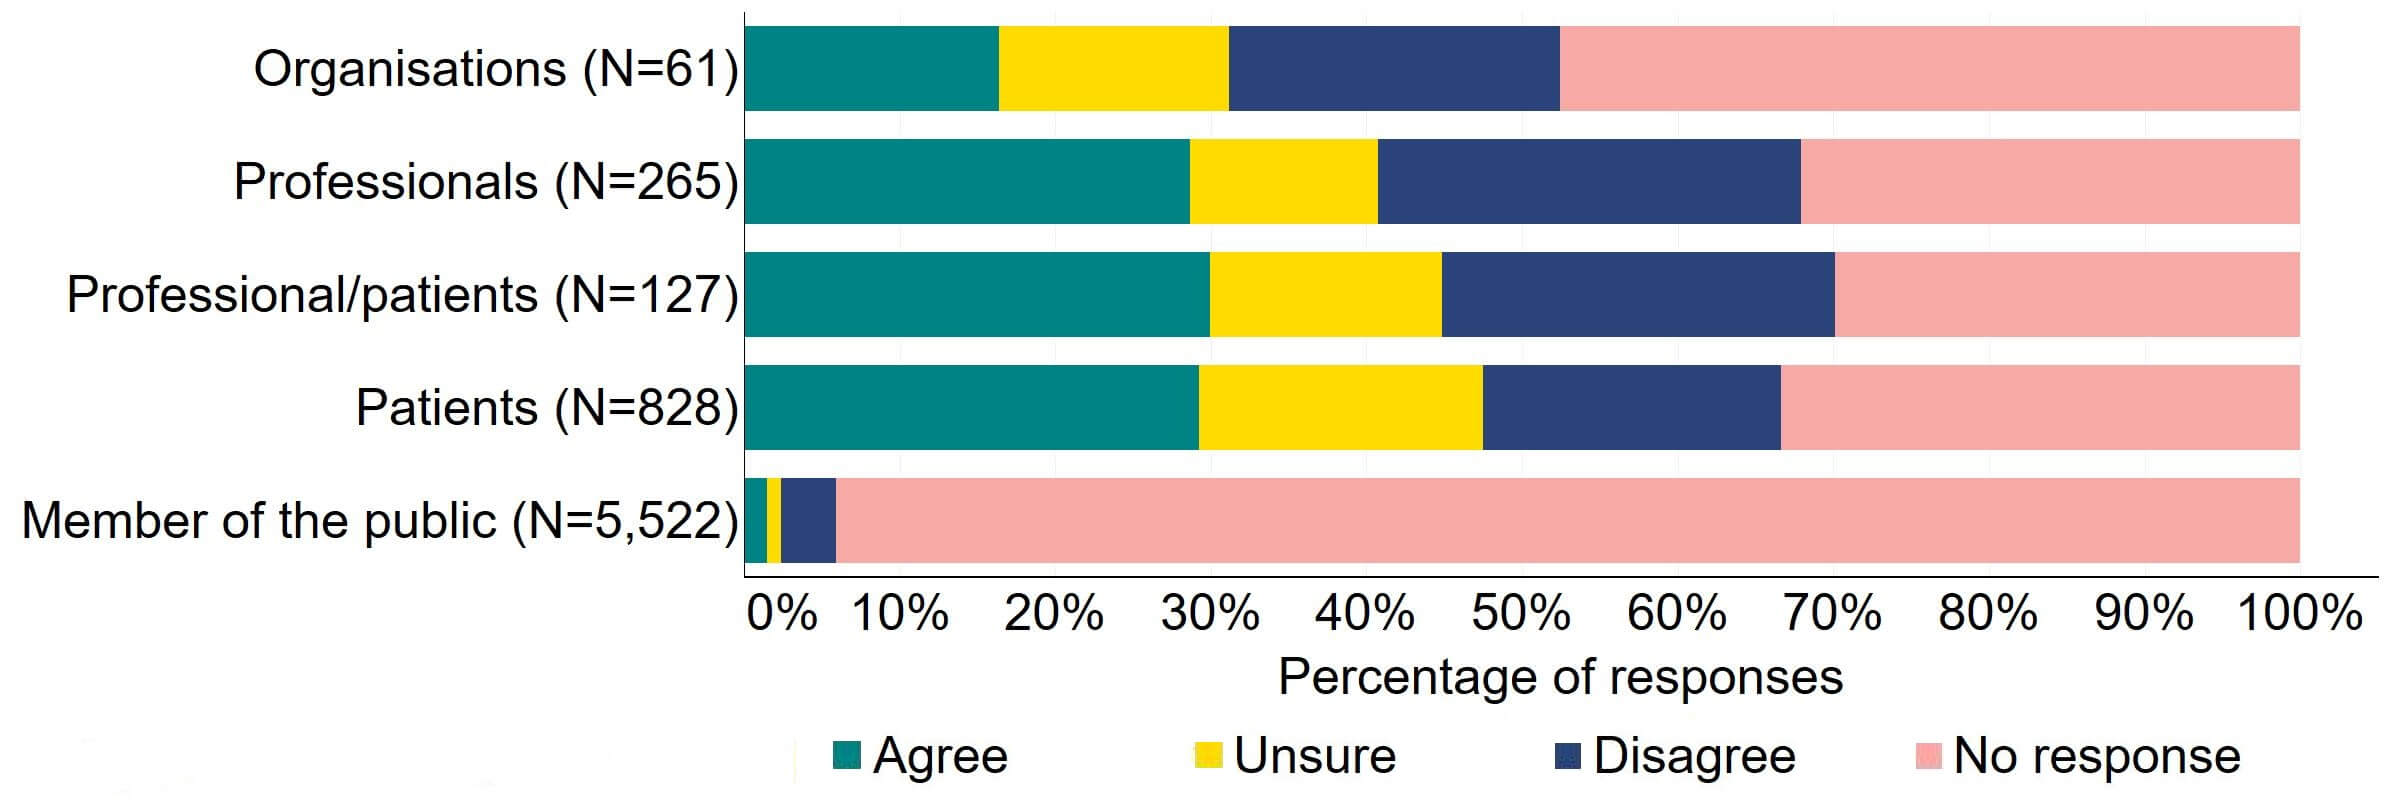 Figure 15 is a stacked bar chart showing the proportion of respondents in each response group who agreed, disagreed, were unsure, or who did not provide a response to the proposal. The underlying data can be downloaded as an Excel worksheet at the top of the page.